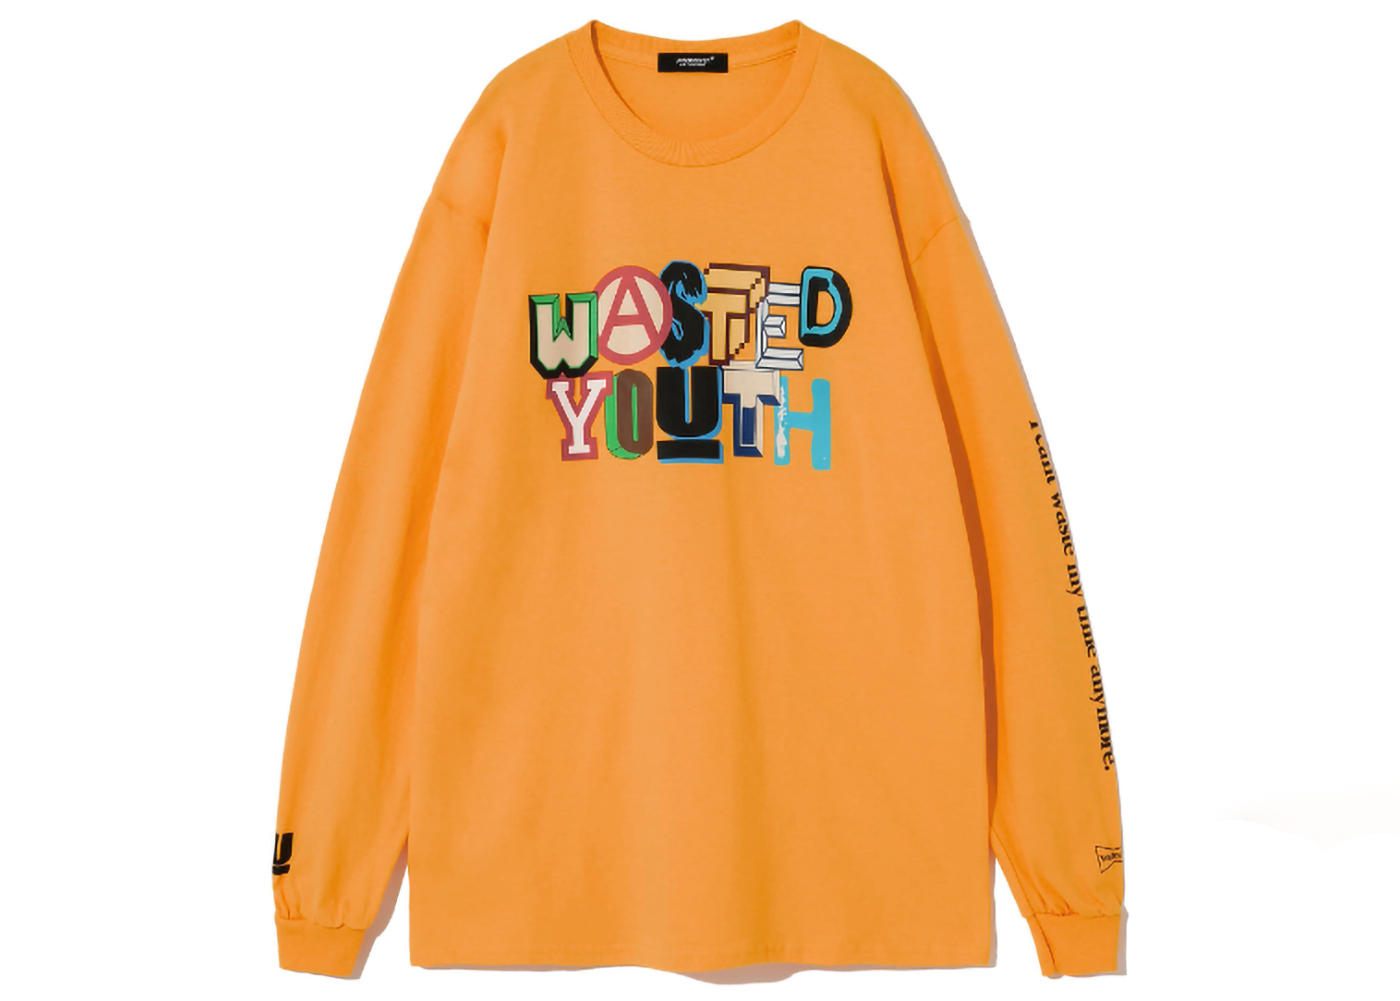 Undercover x Verdy Wasted Youth L/S T-Shirt Yellow - SS23 - US